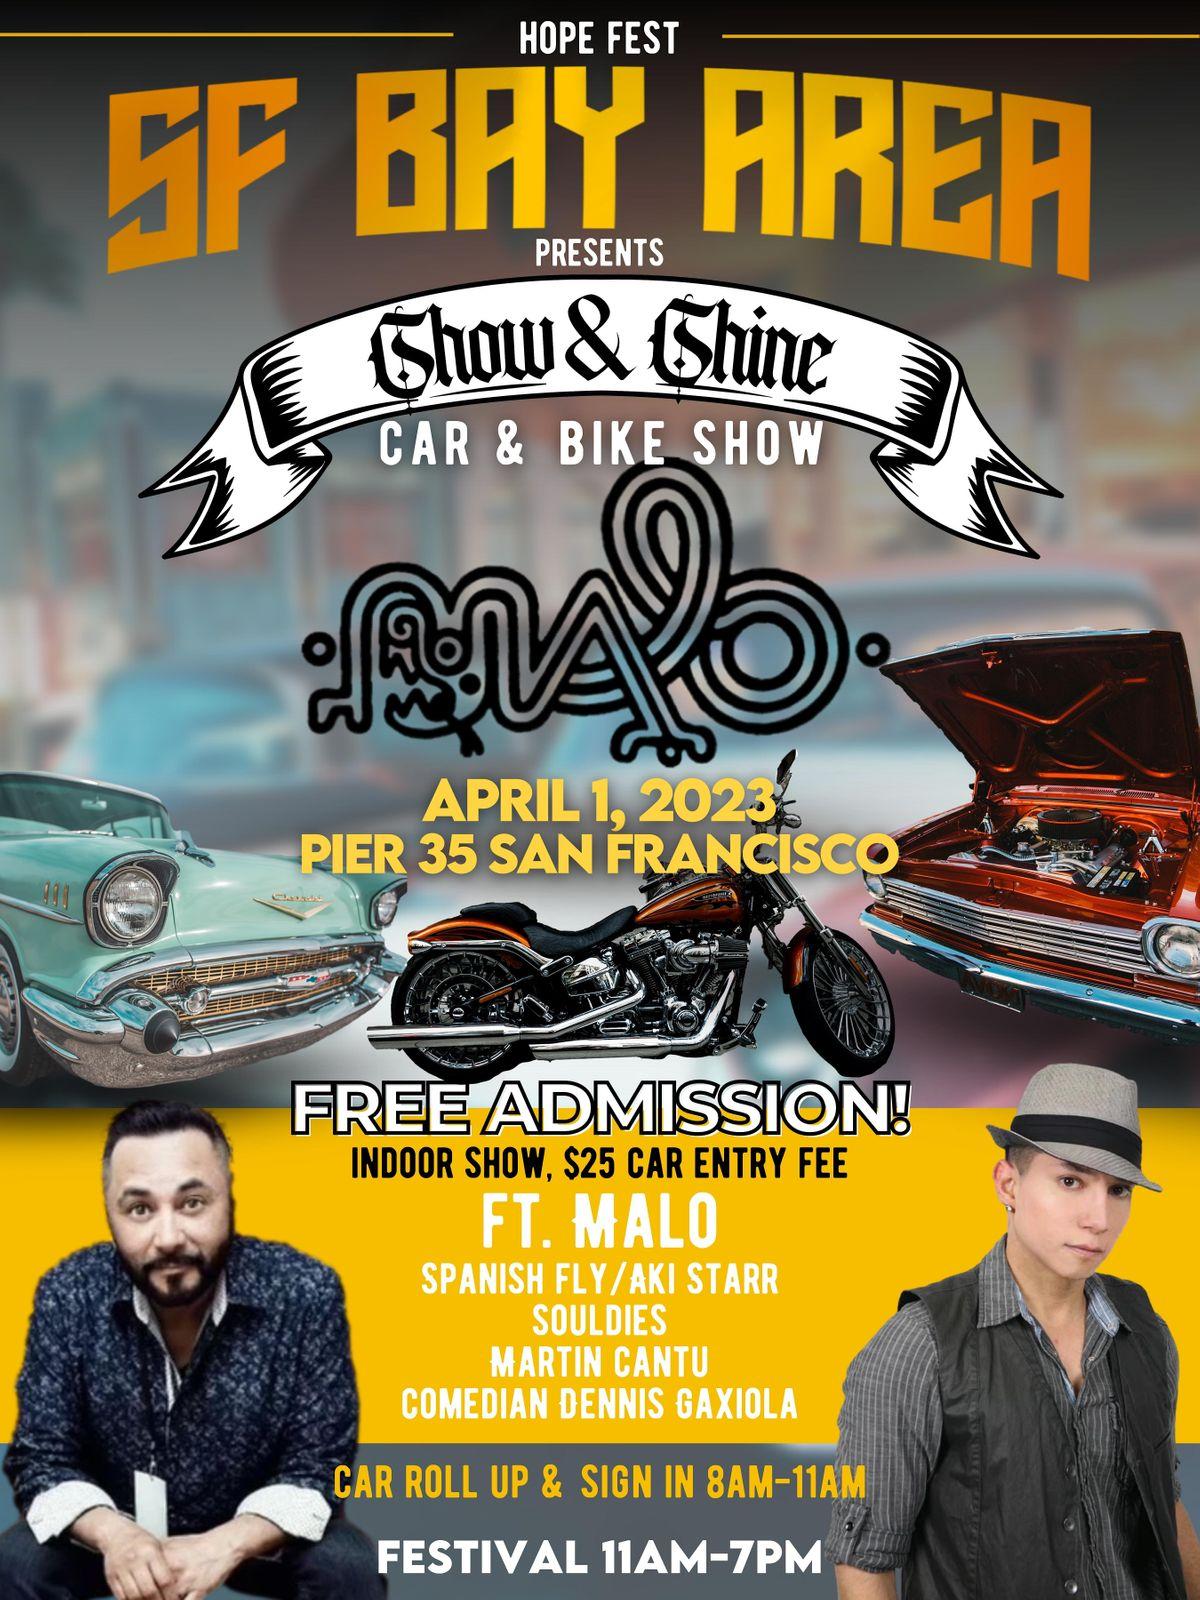 Hope Fest SF Bay Area&quot; Show and Shine&quot; Car Registration